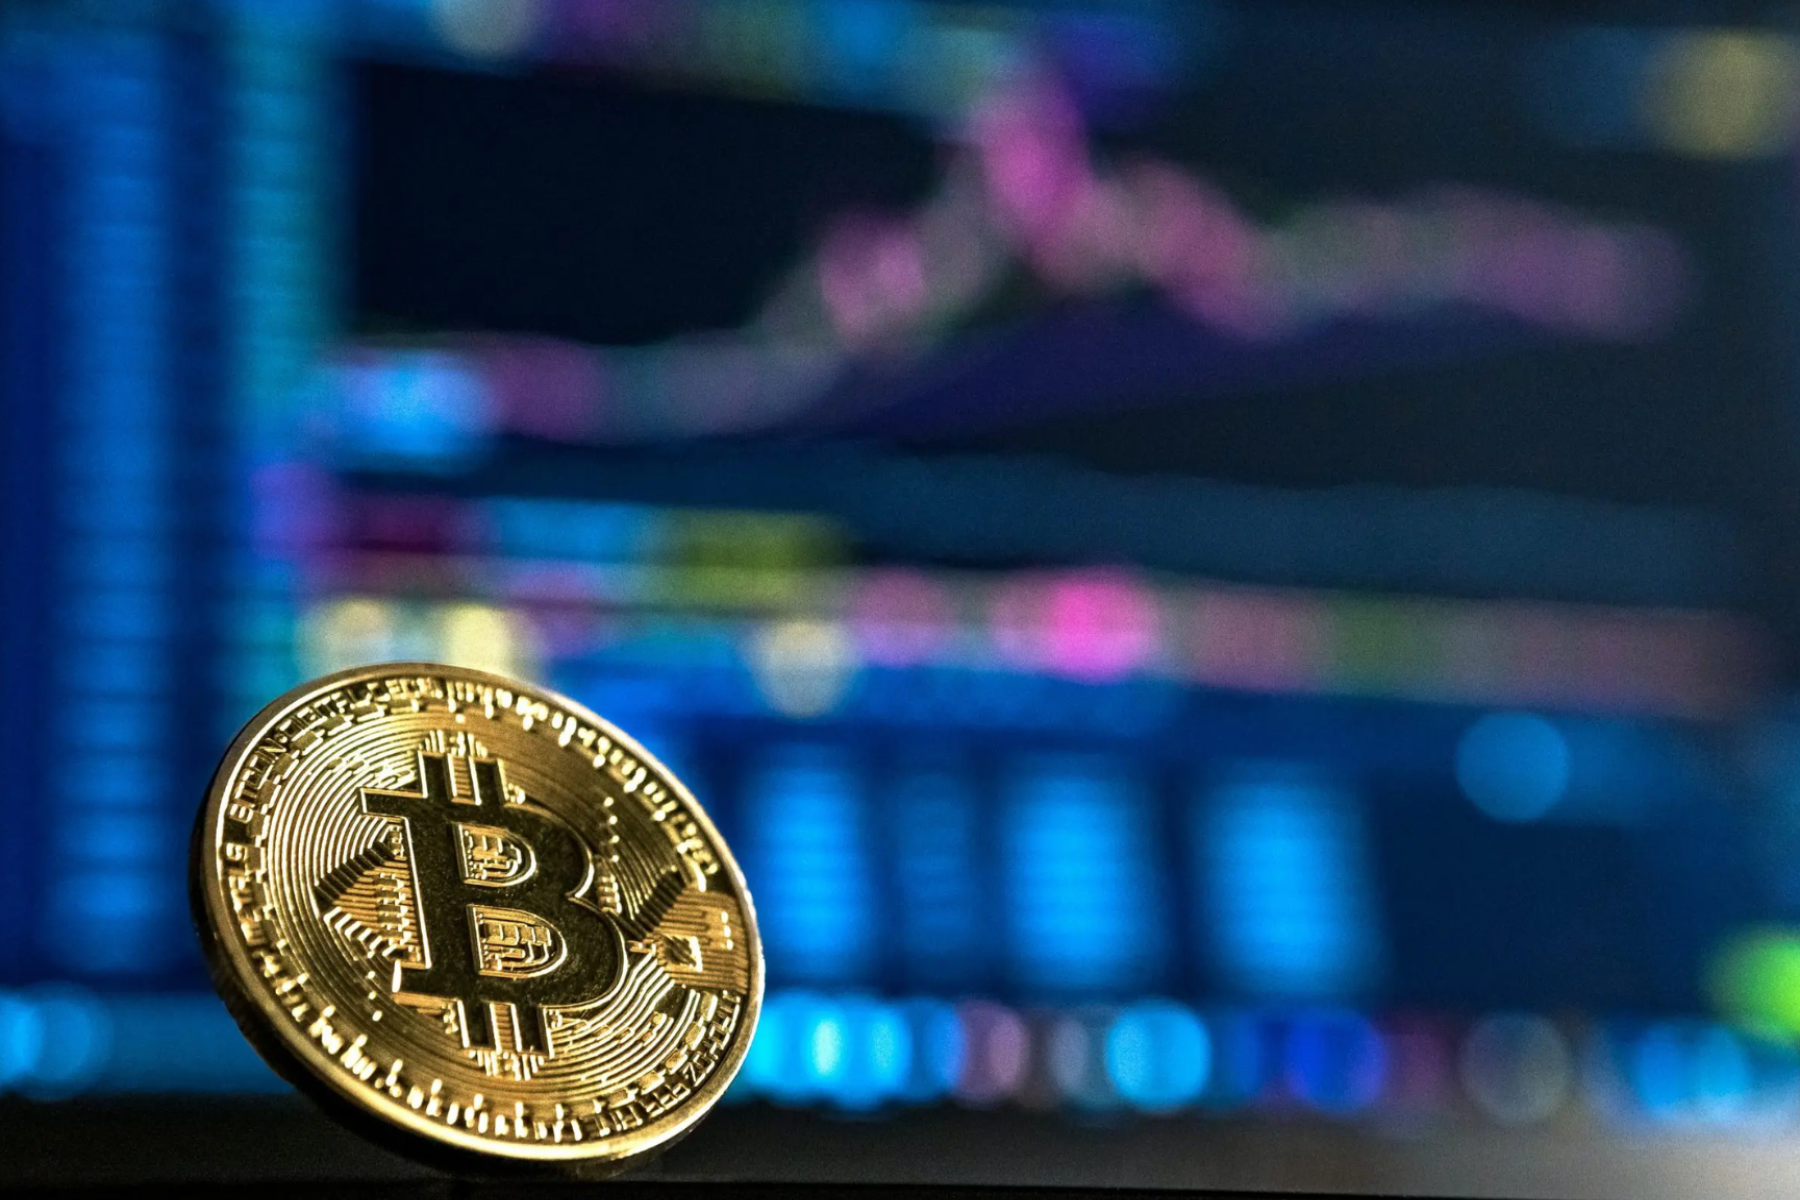 A single golden Bitcoin is placed in front of a computer screen with a blurred background